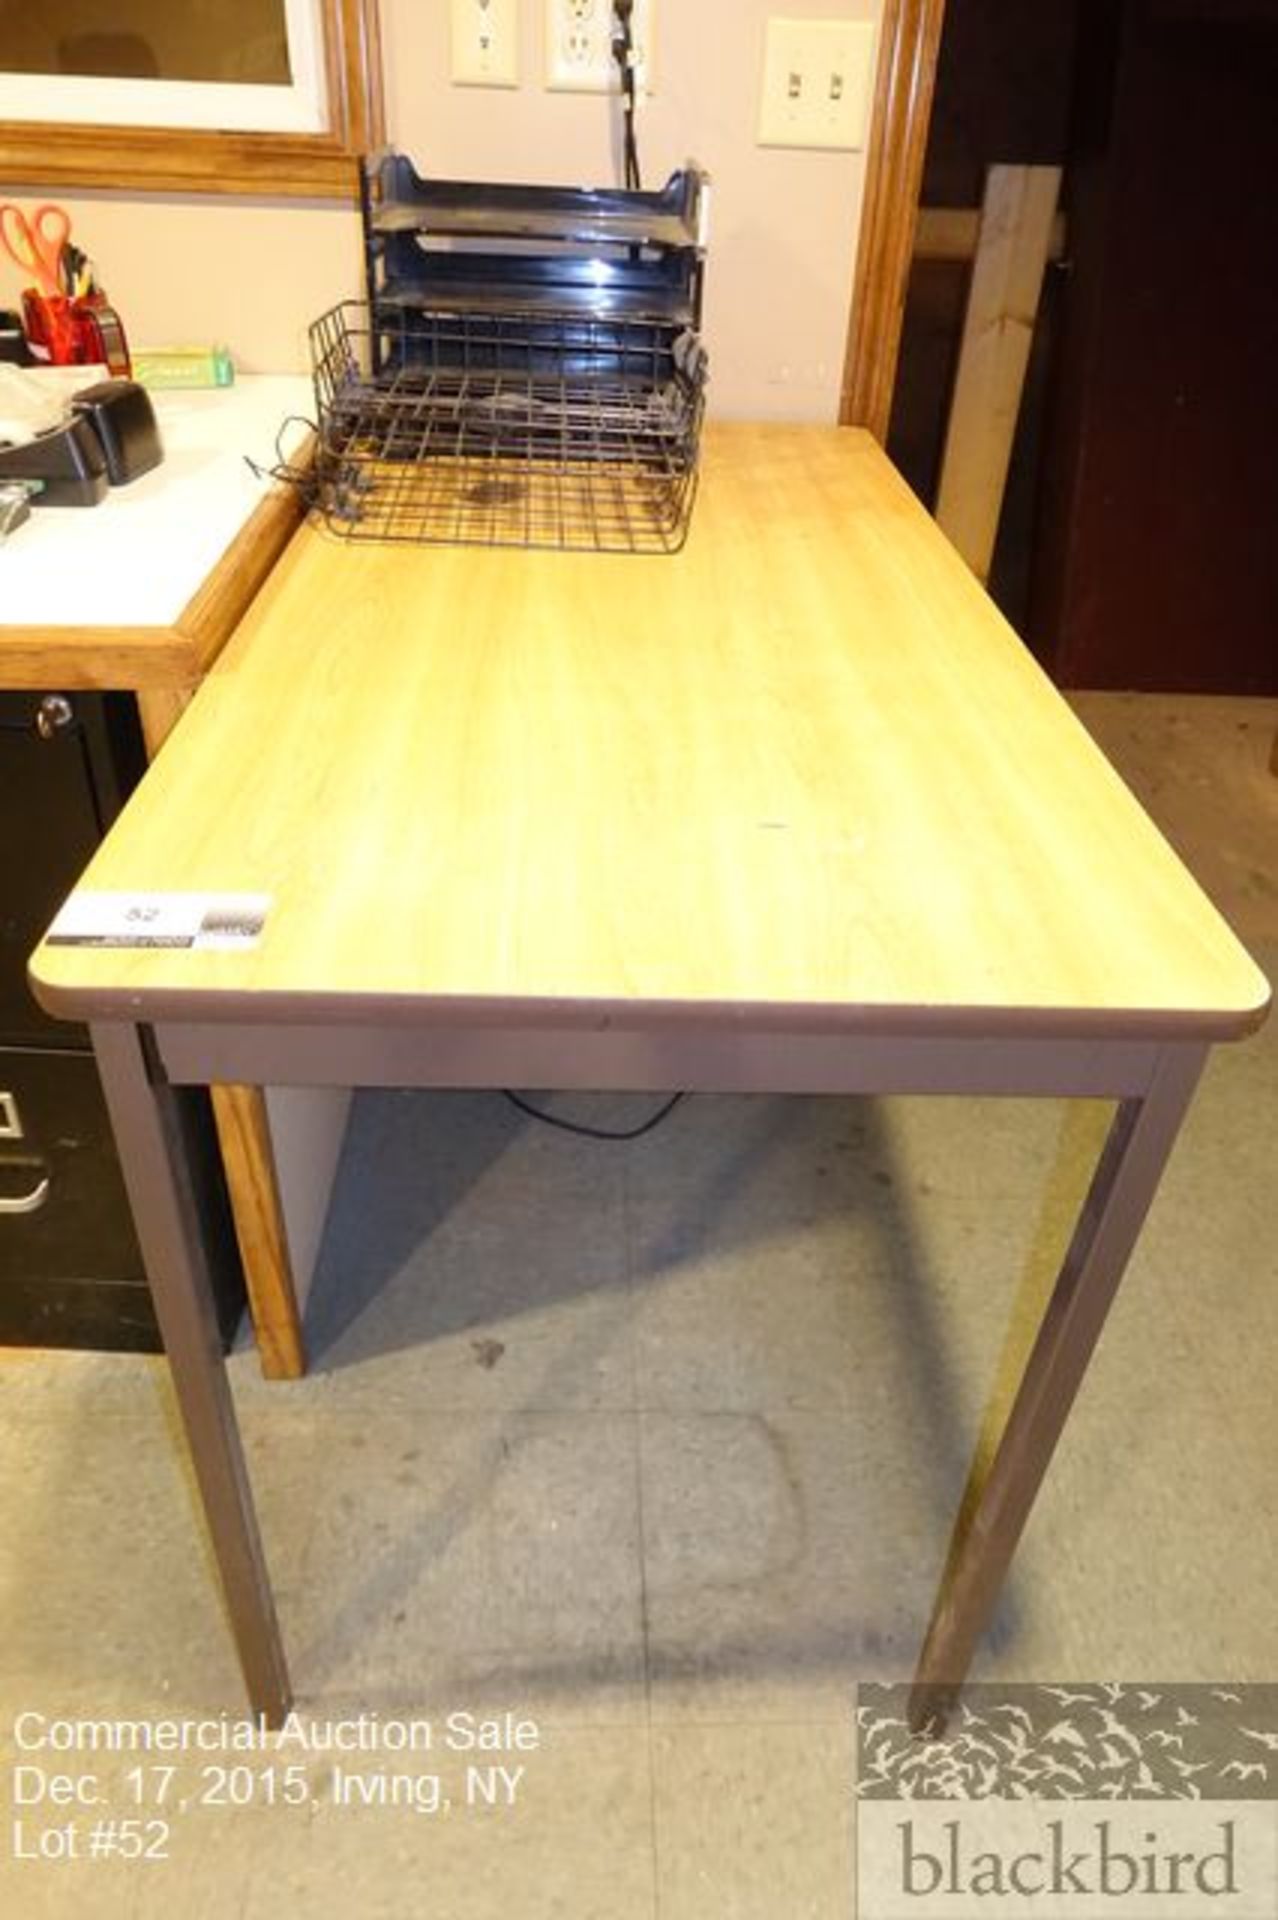 Formica top table, 48" x 24"